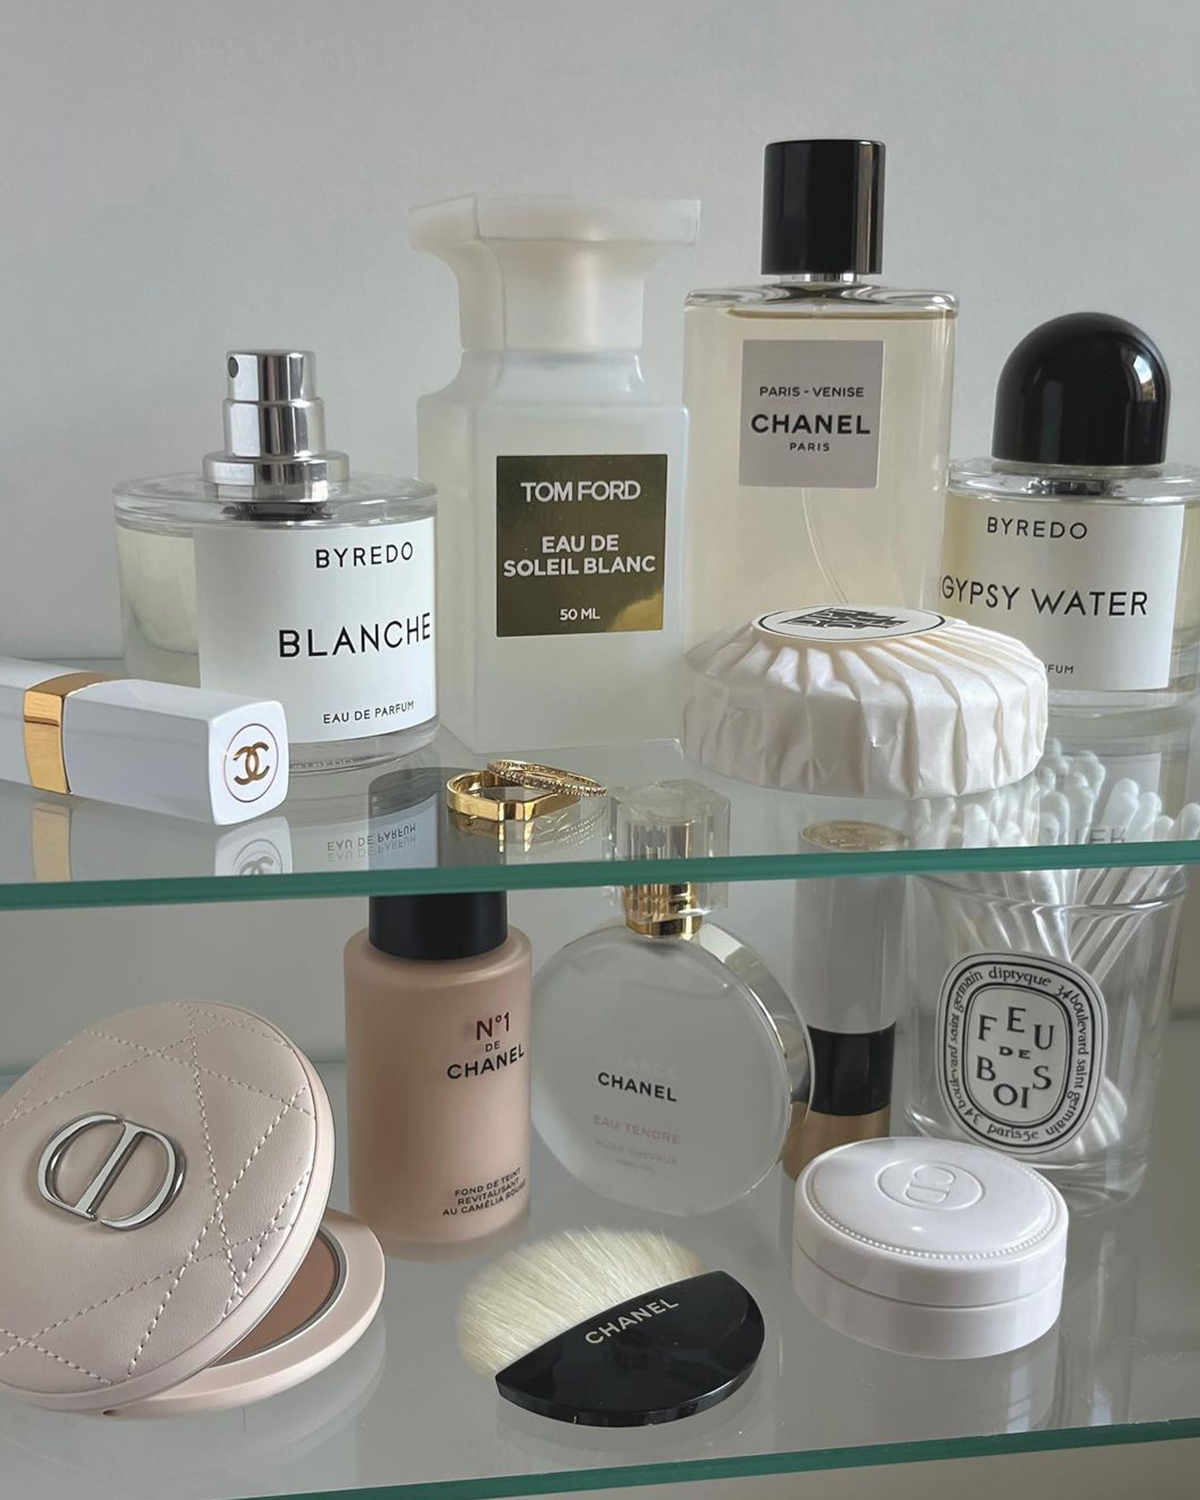 body sprays for women: a picture of perfumes on a shelf: @pink_oblivion